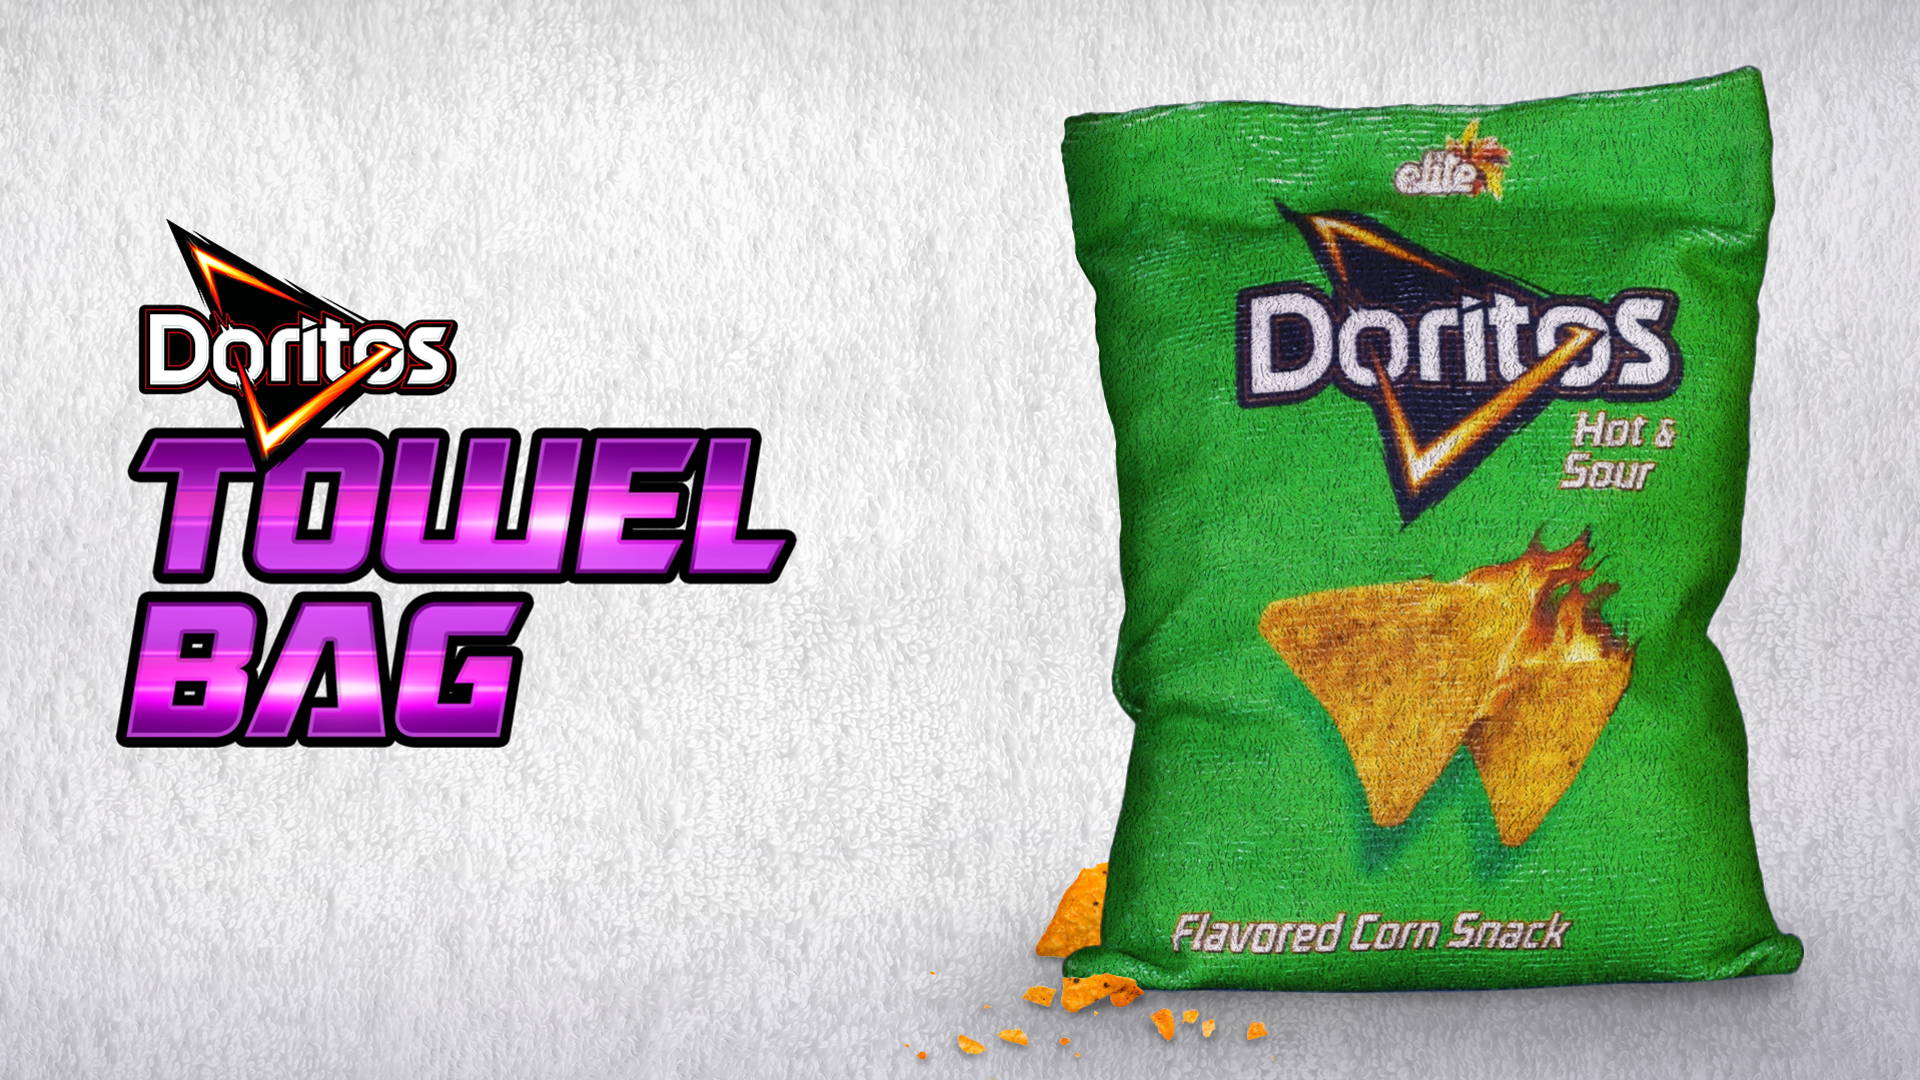 New Doritos Towel Bag Promises No More Cheese Fingers. Dieline, Branding & Packaging Inspiration